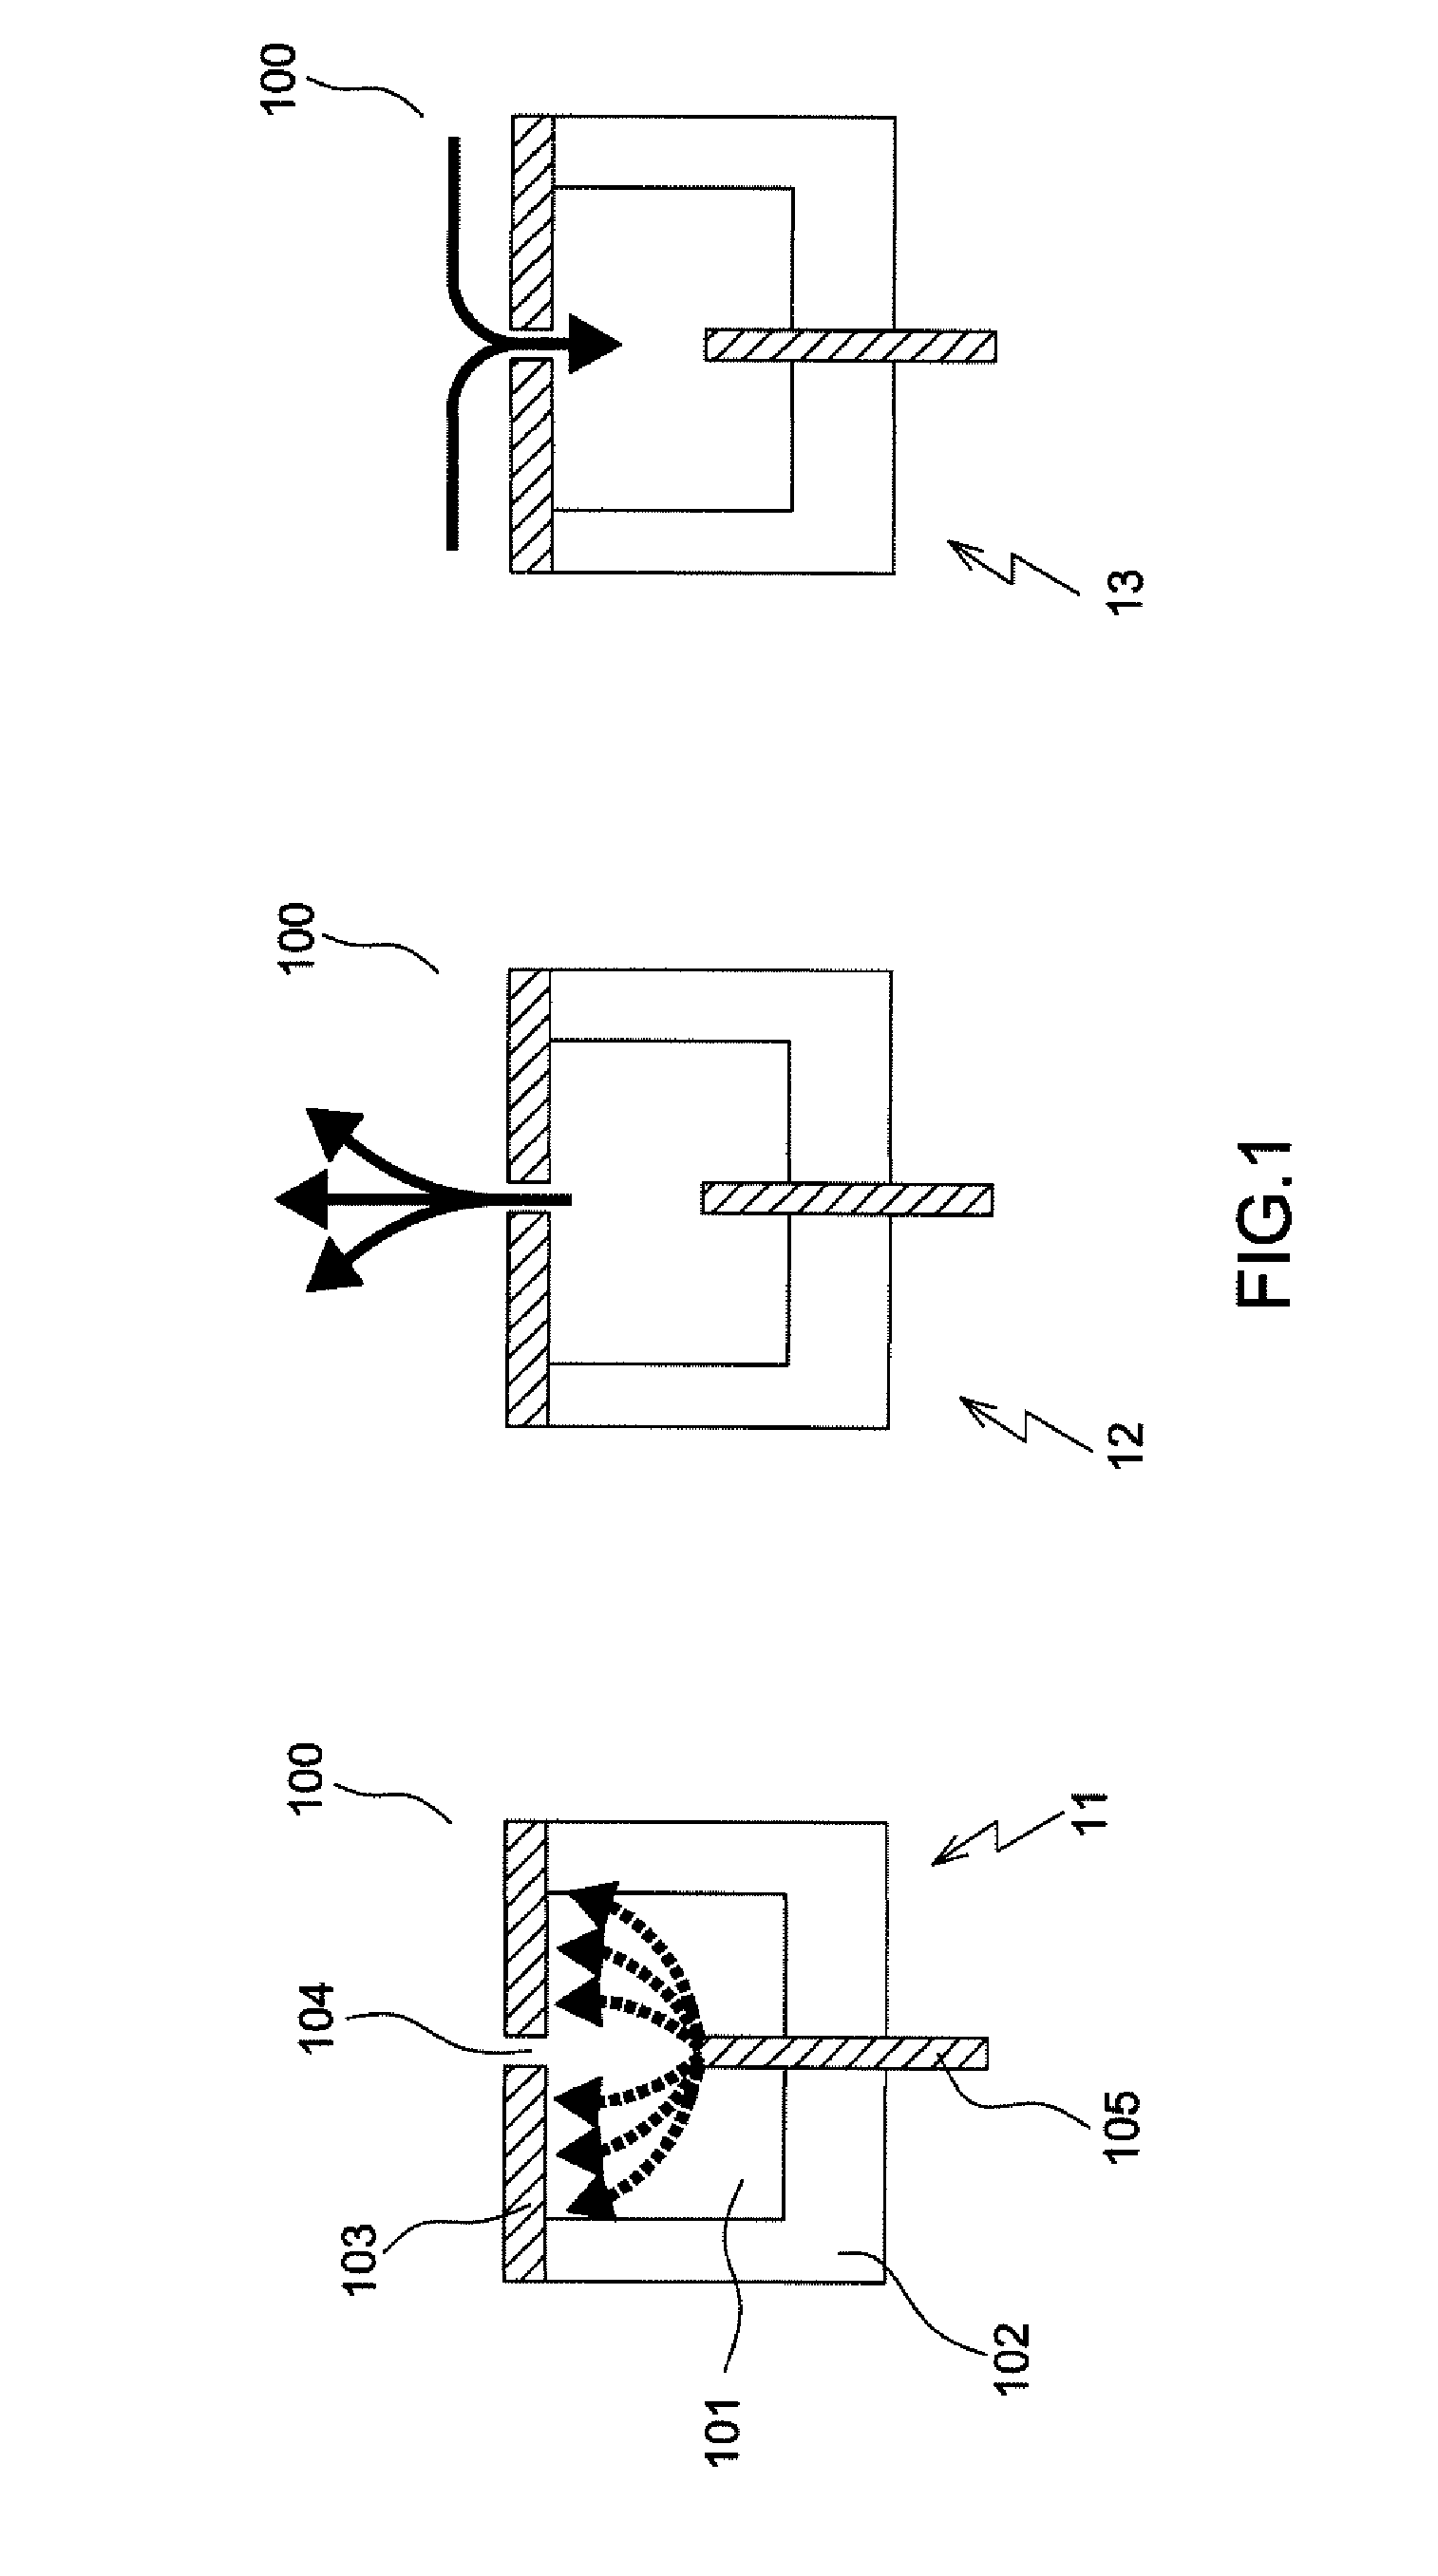 Device for monitoring the correct operation of a plurality of devices, notably actuators